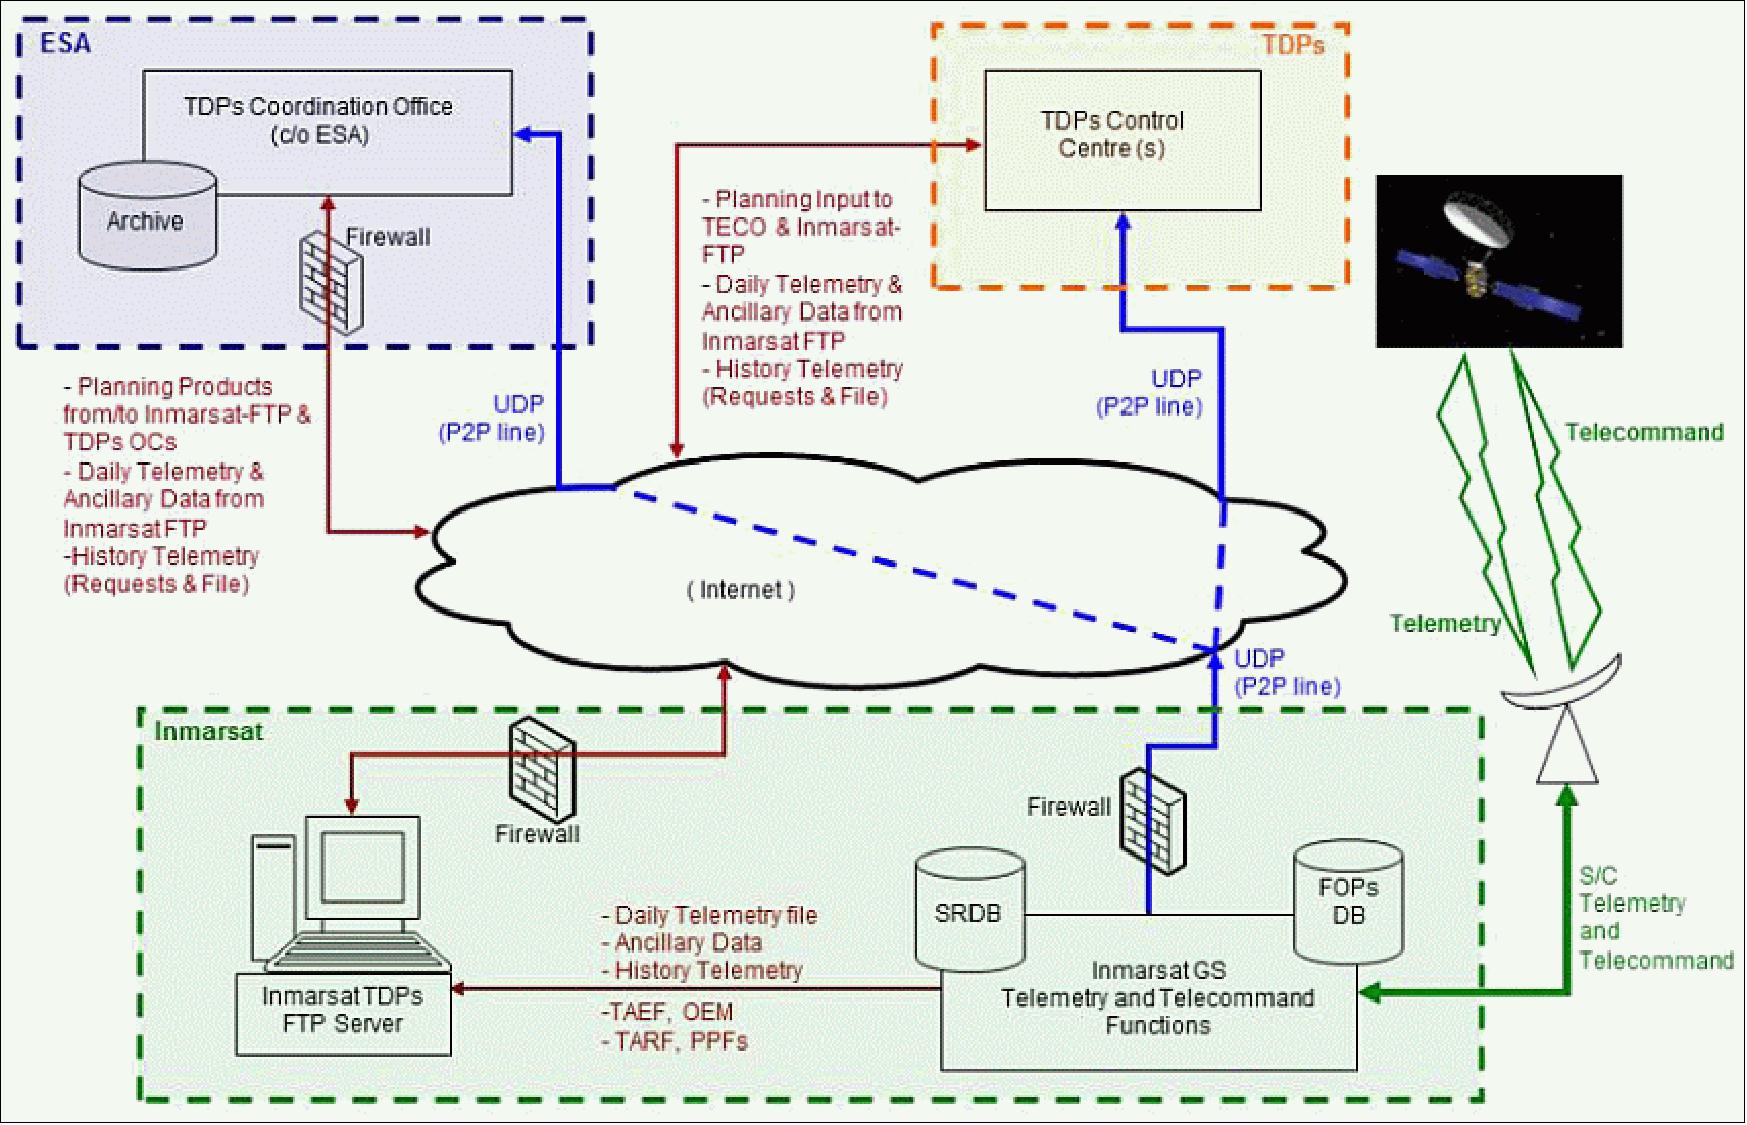 Figure 49: TDPs Monitoring and Control GS topological architecture (image credit: ESA, Inmarsat)